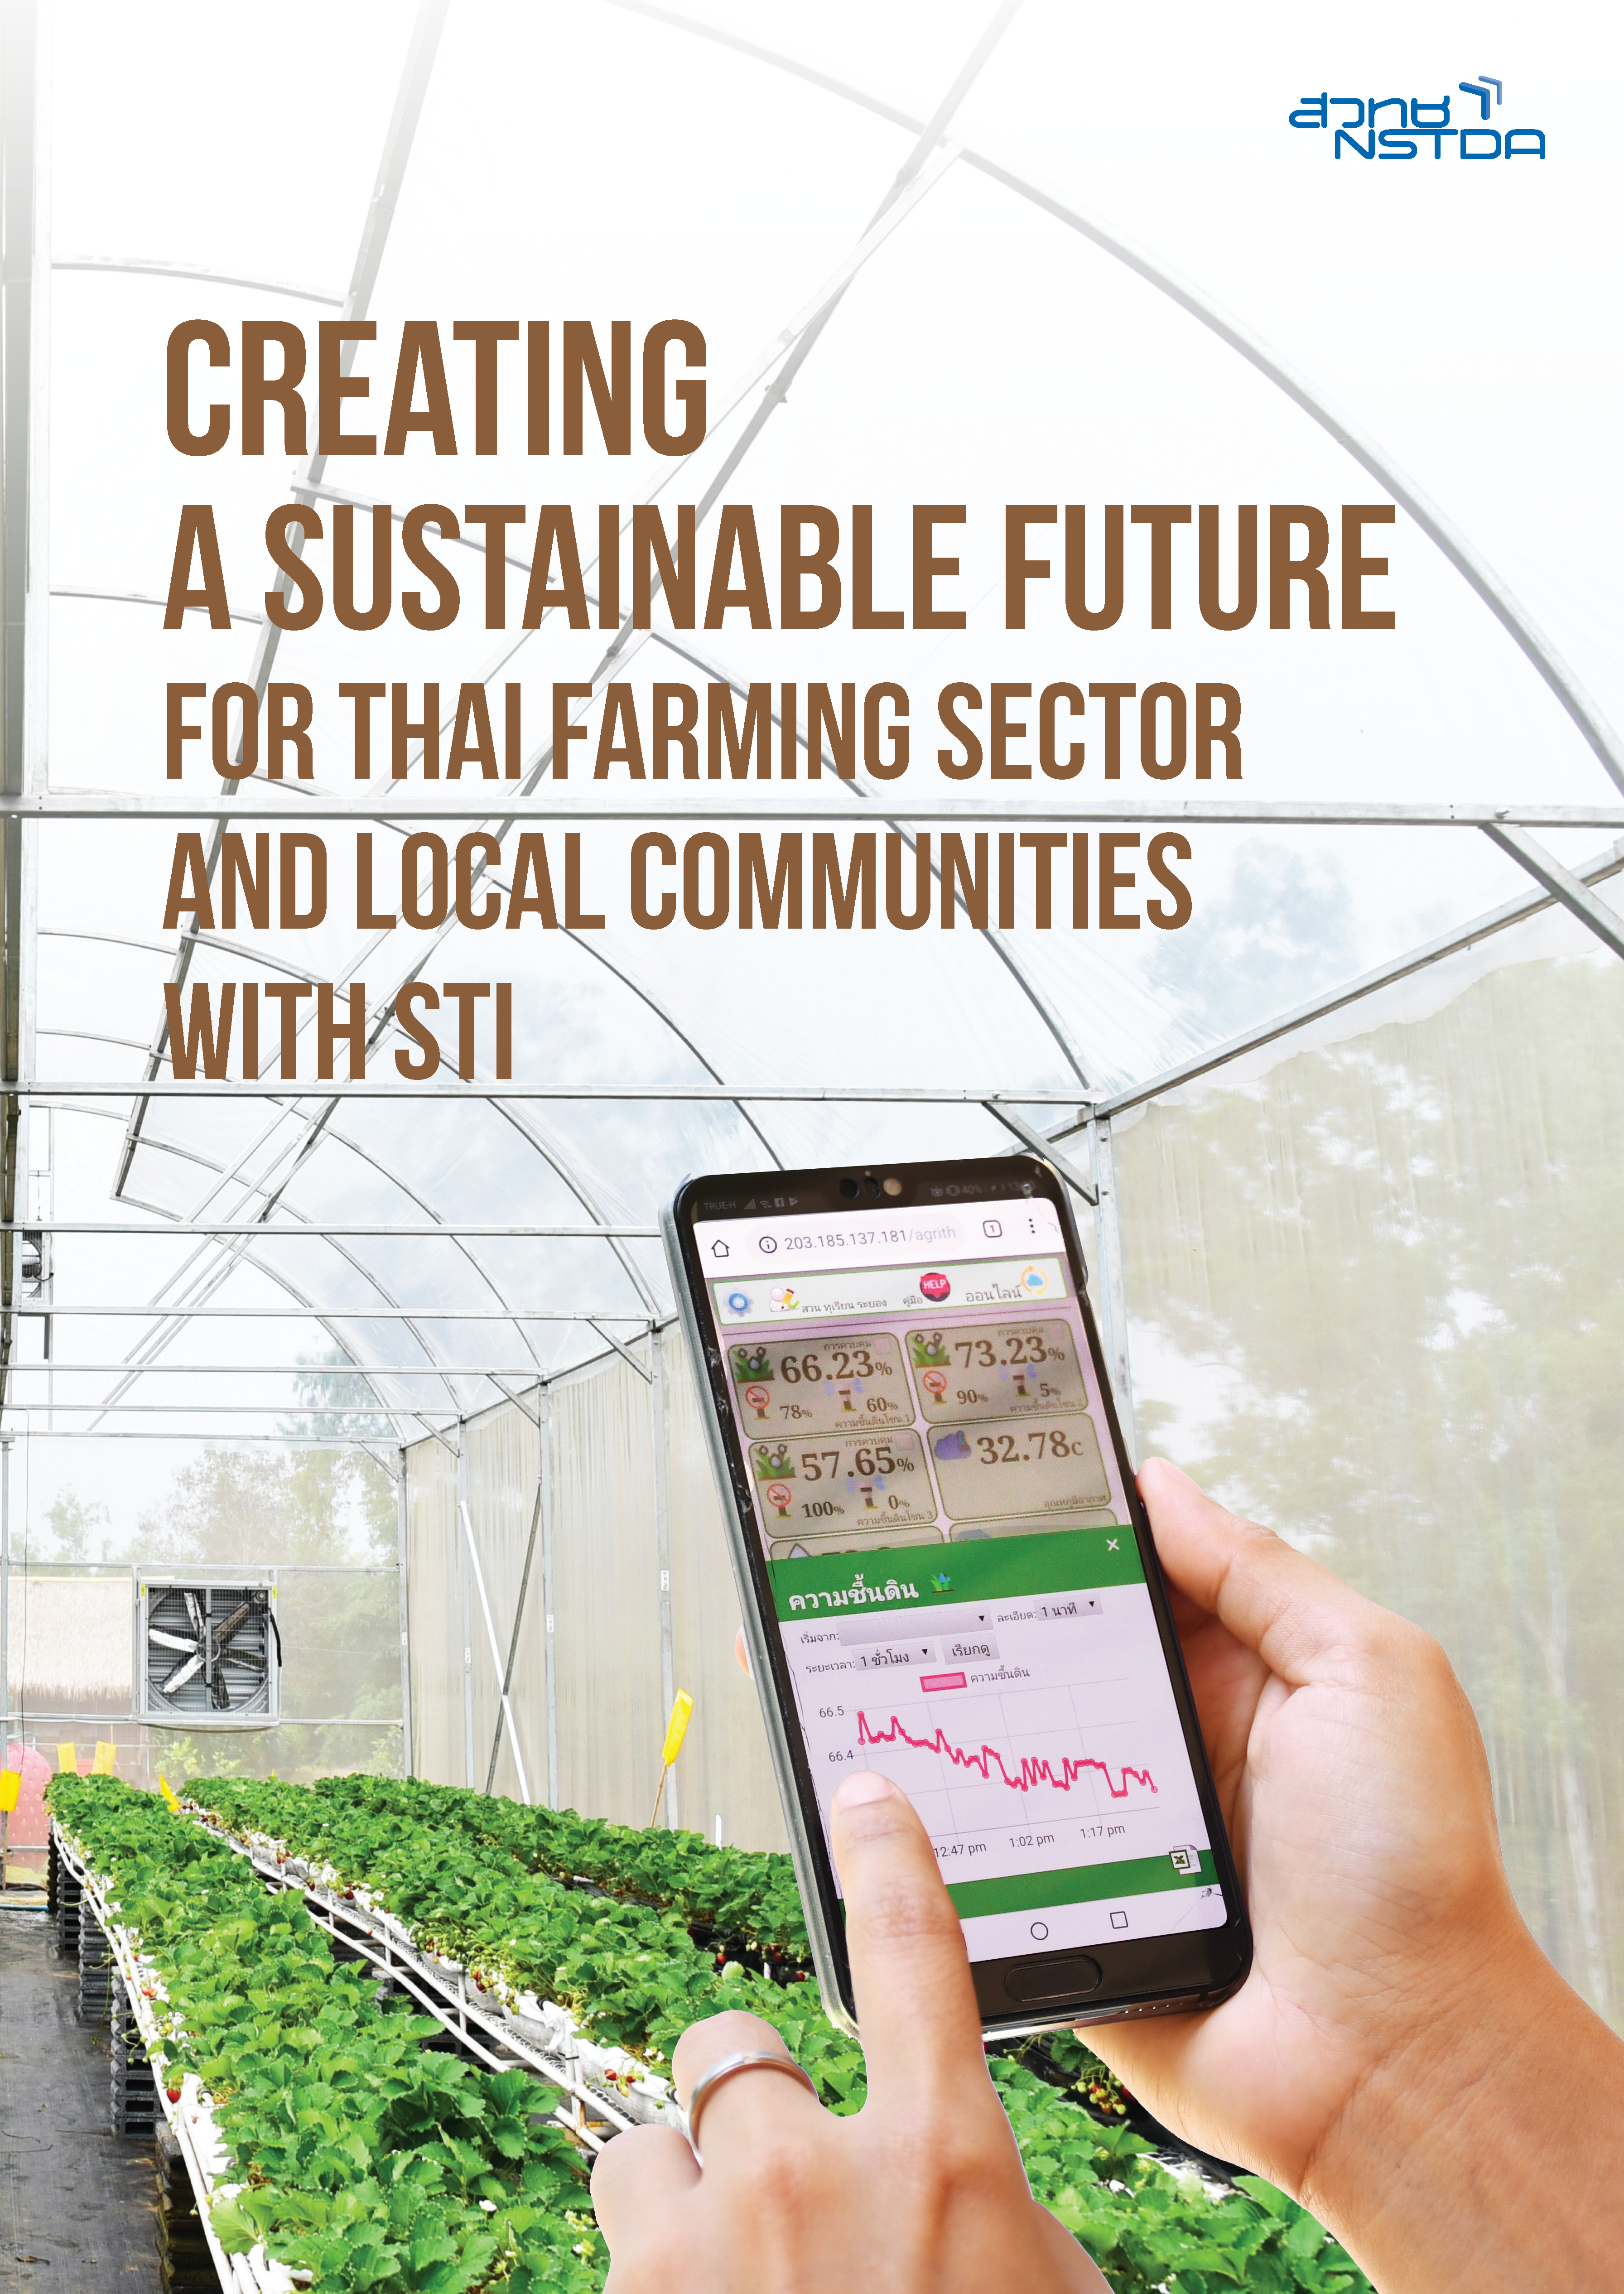 CREATING A SUSTAINABLE FUTURE FOR THAI FARMING SECTOR AND LOCAL COMMUNITIES WITH STI